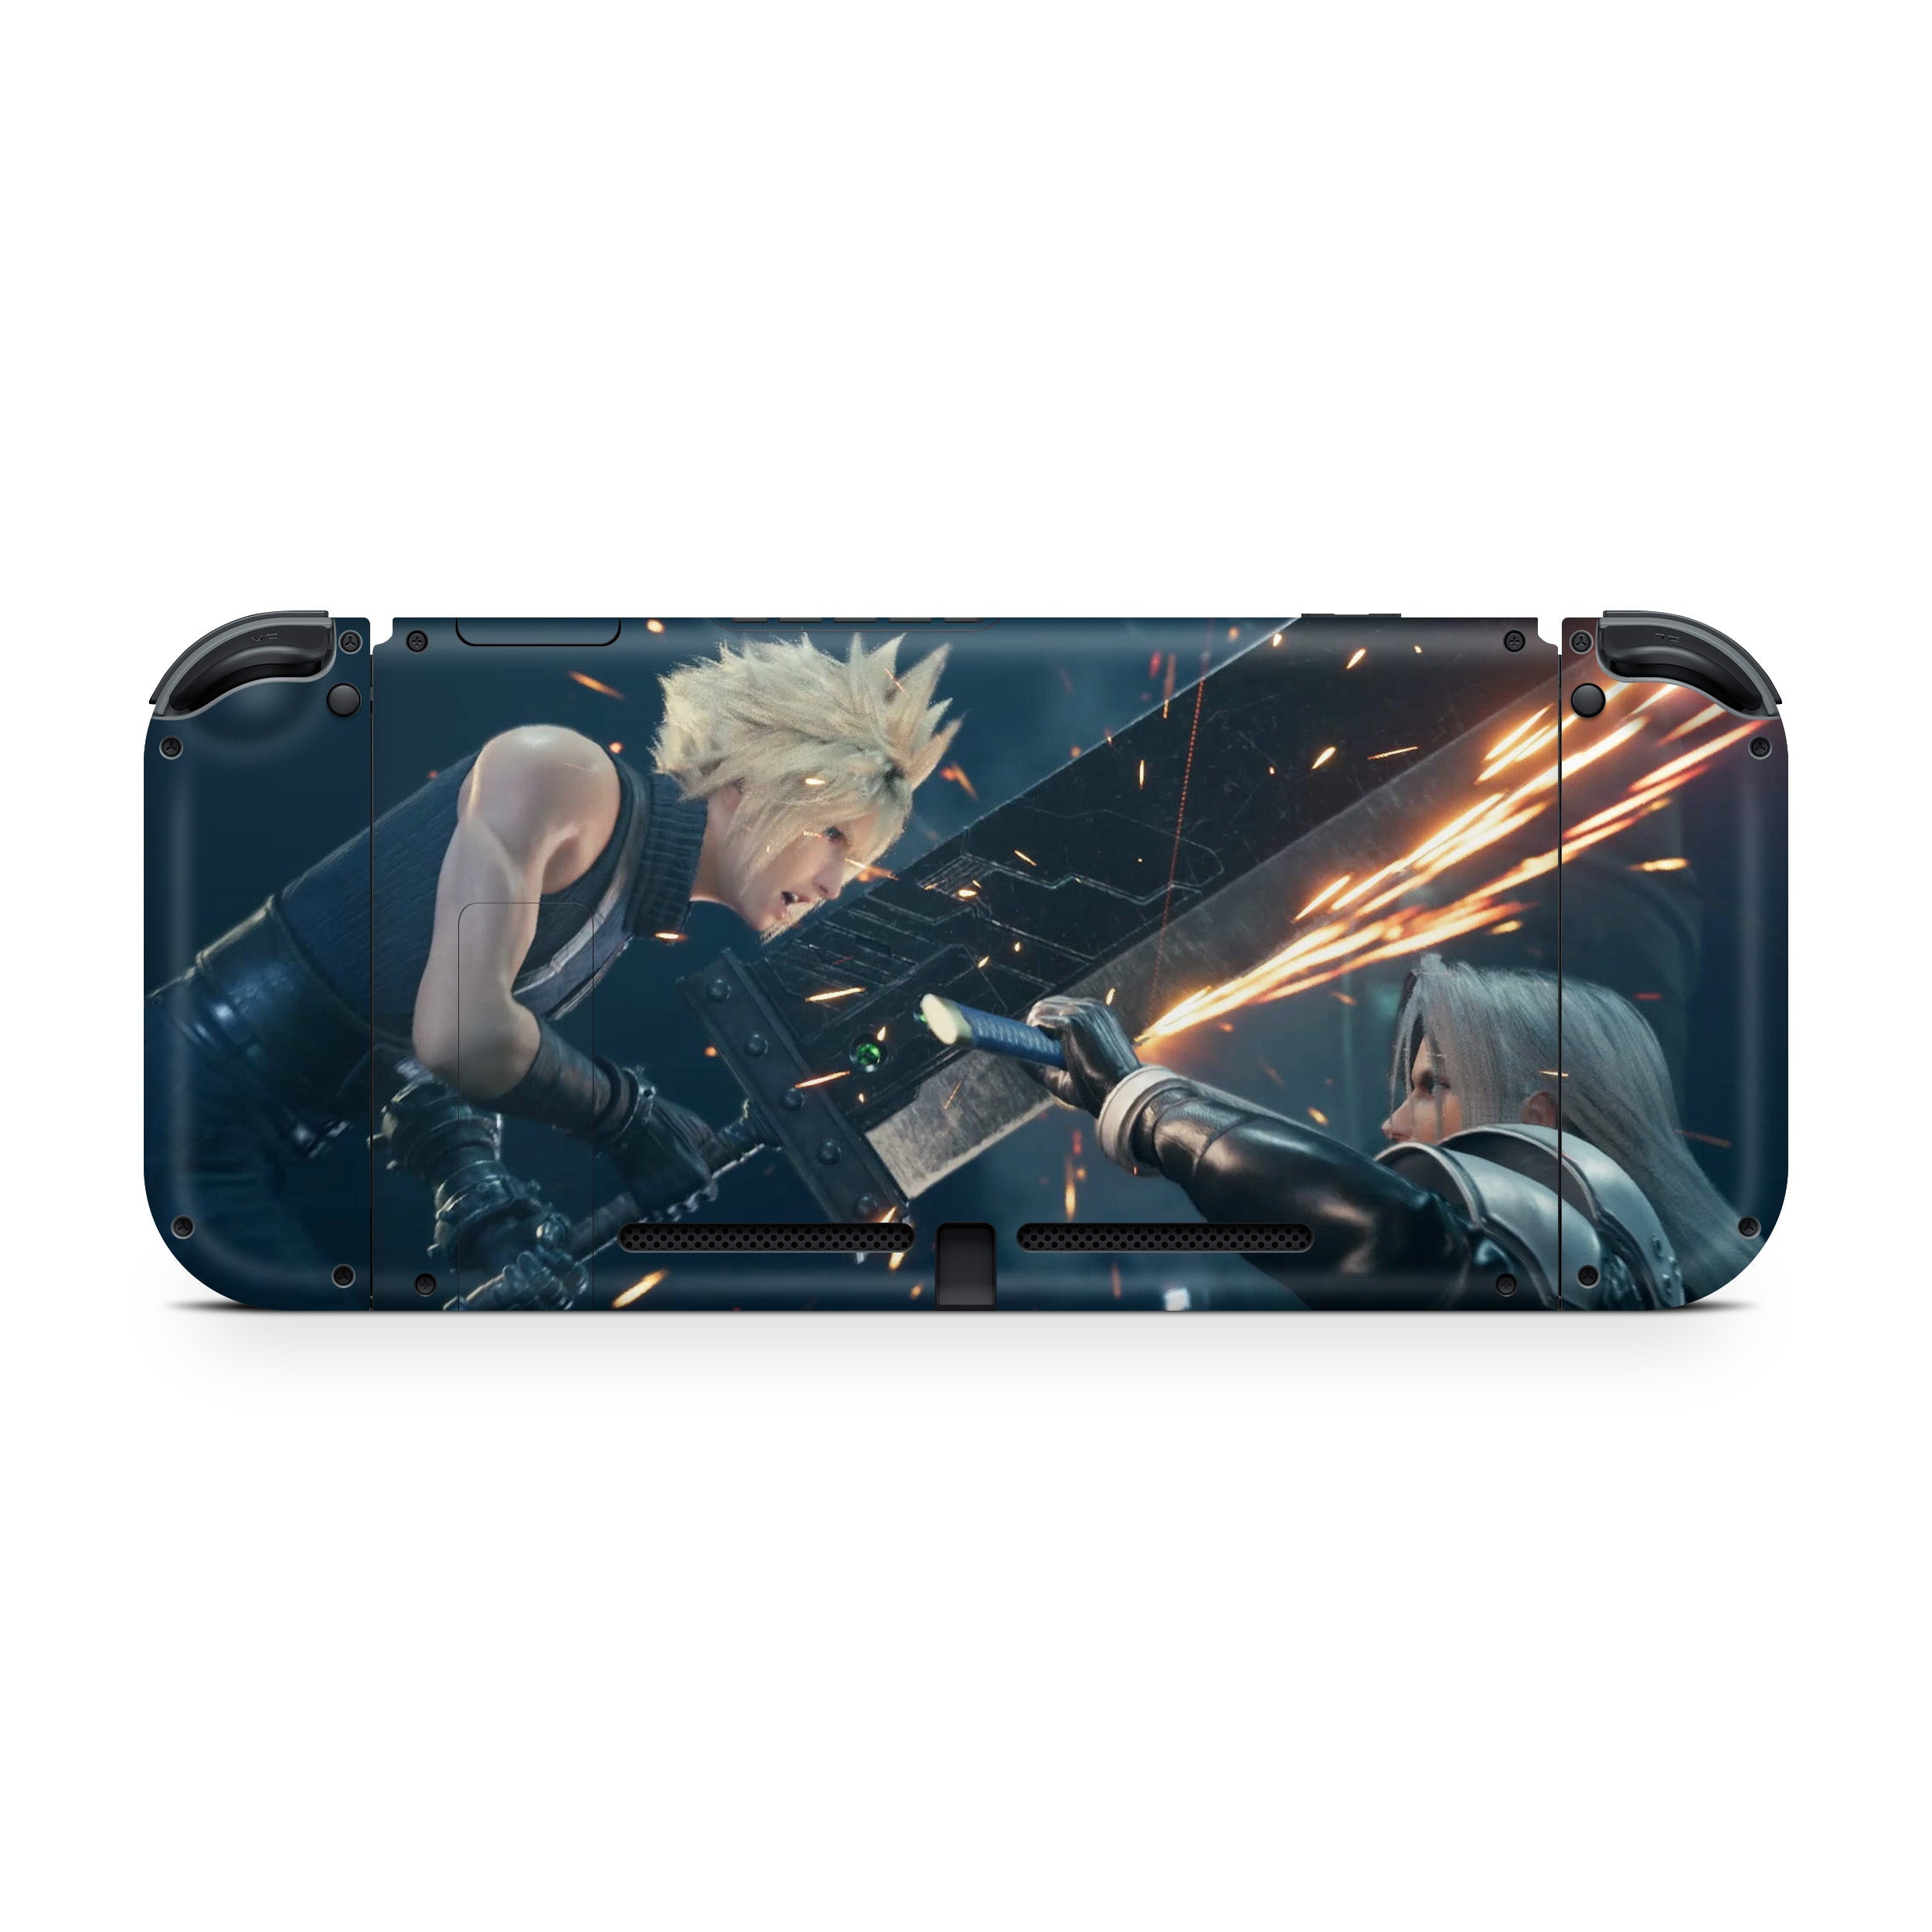 A video game skin featuring a Final Fantasy 7 Cloud vs Sephiroth design for the Nintendo Switch.